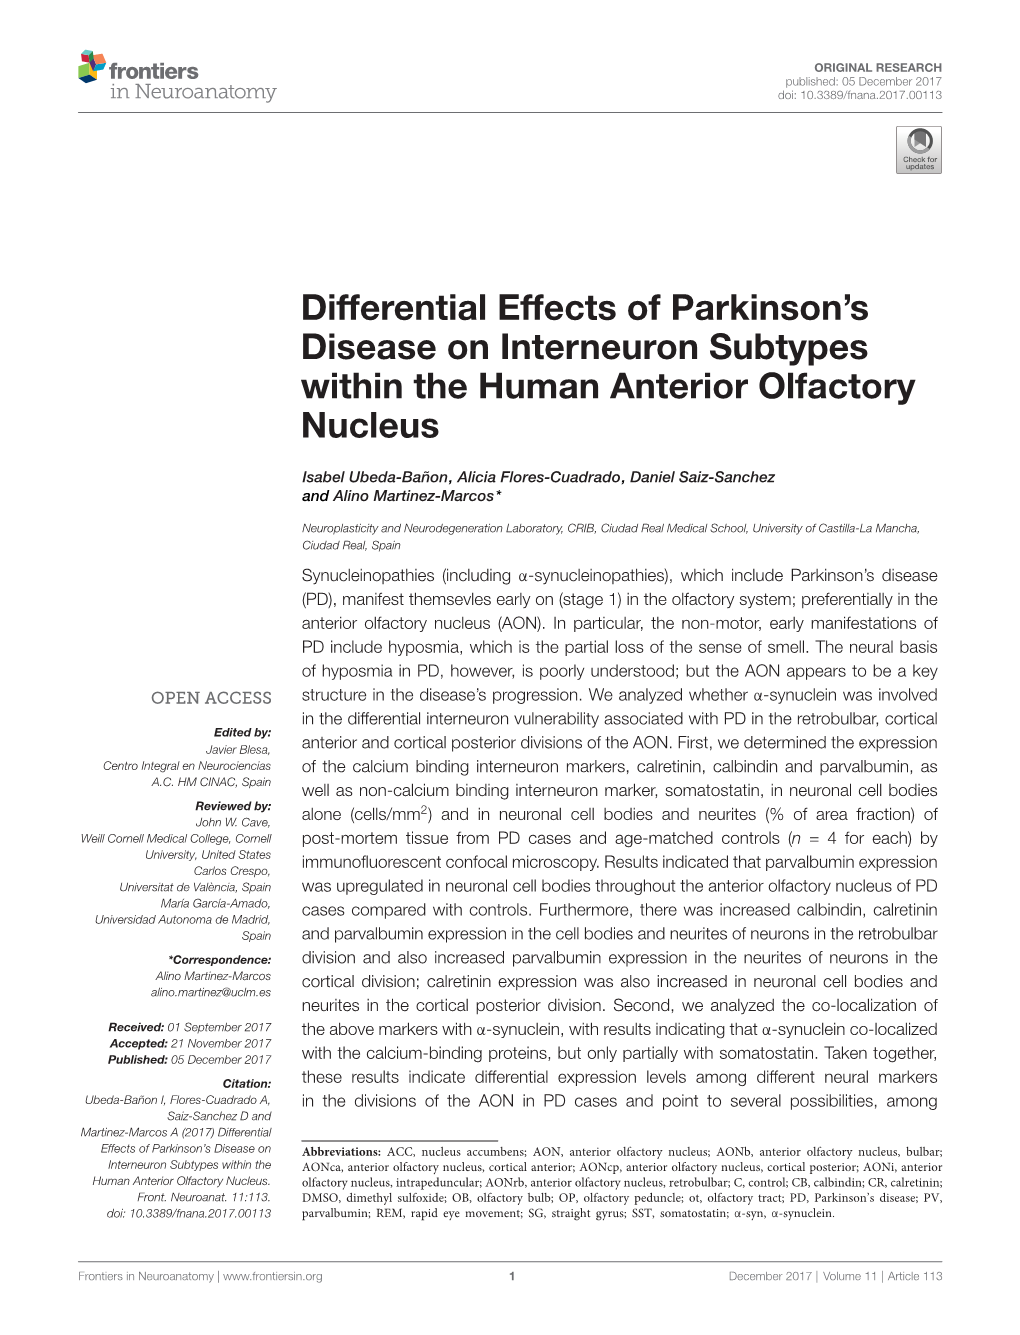 Differential Effects of Parkinson's Disease on Interneuron Subtypes